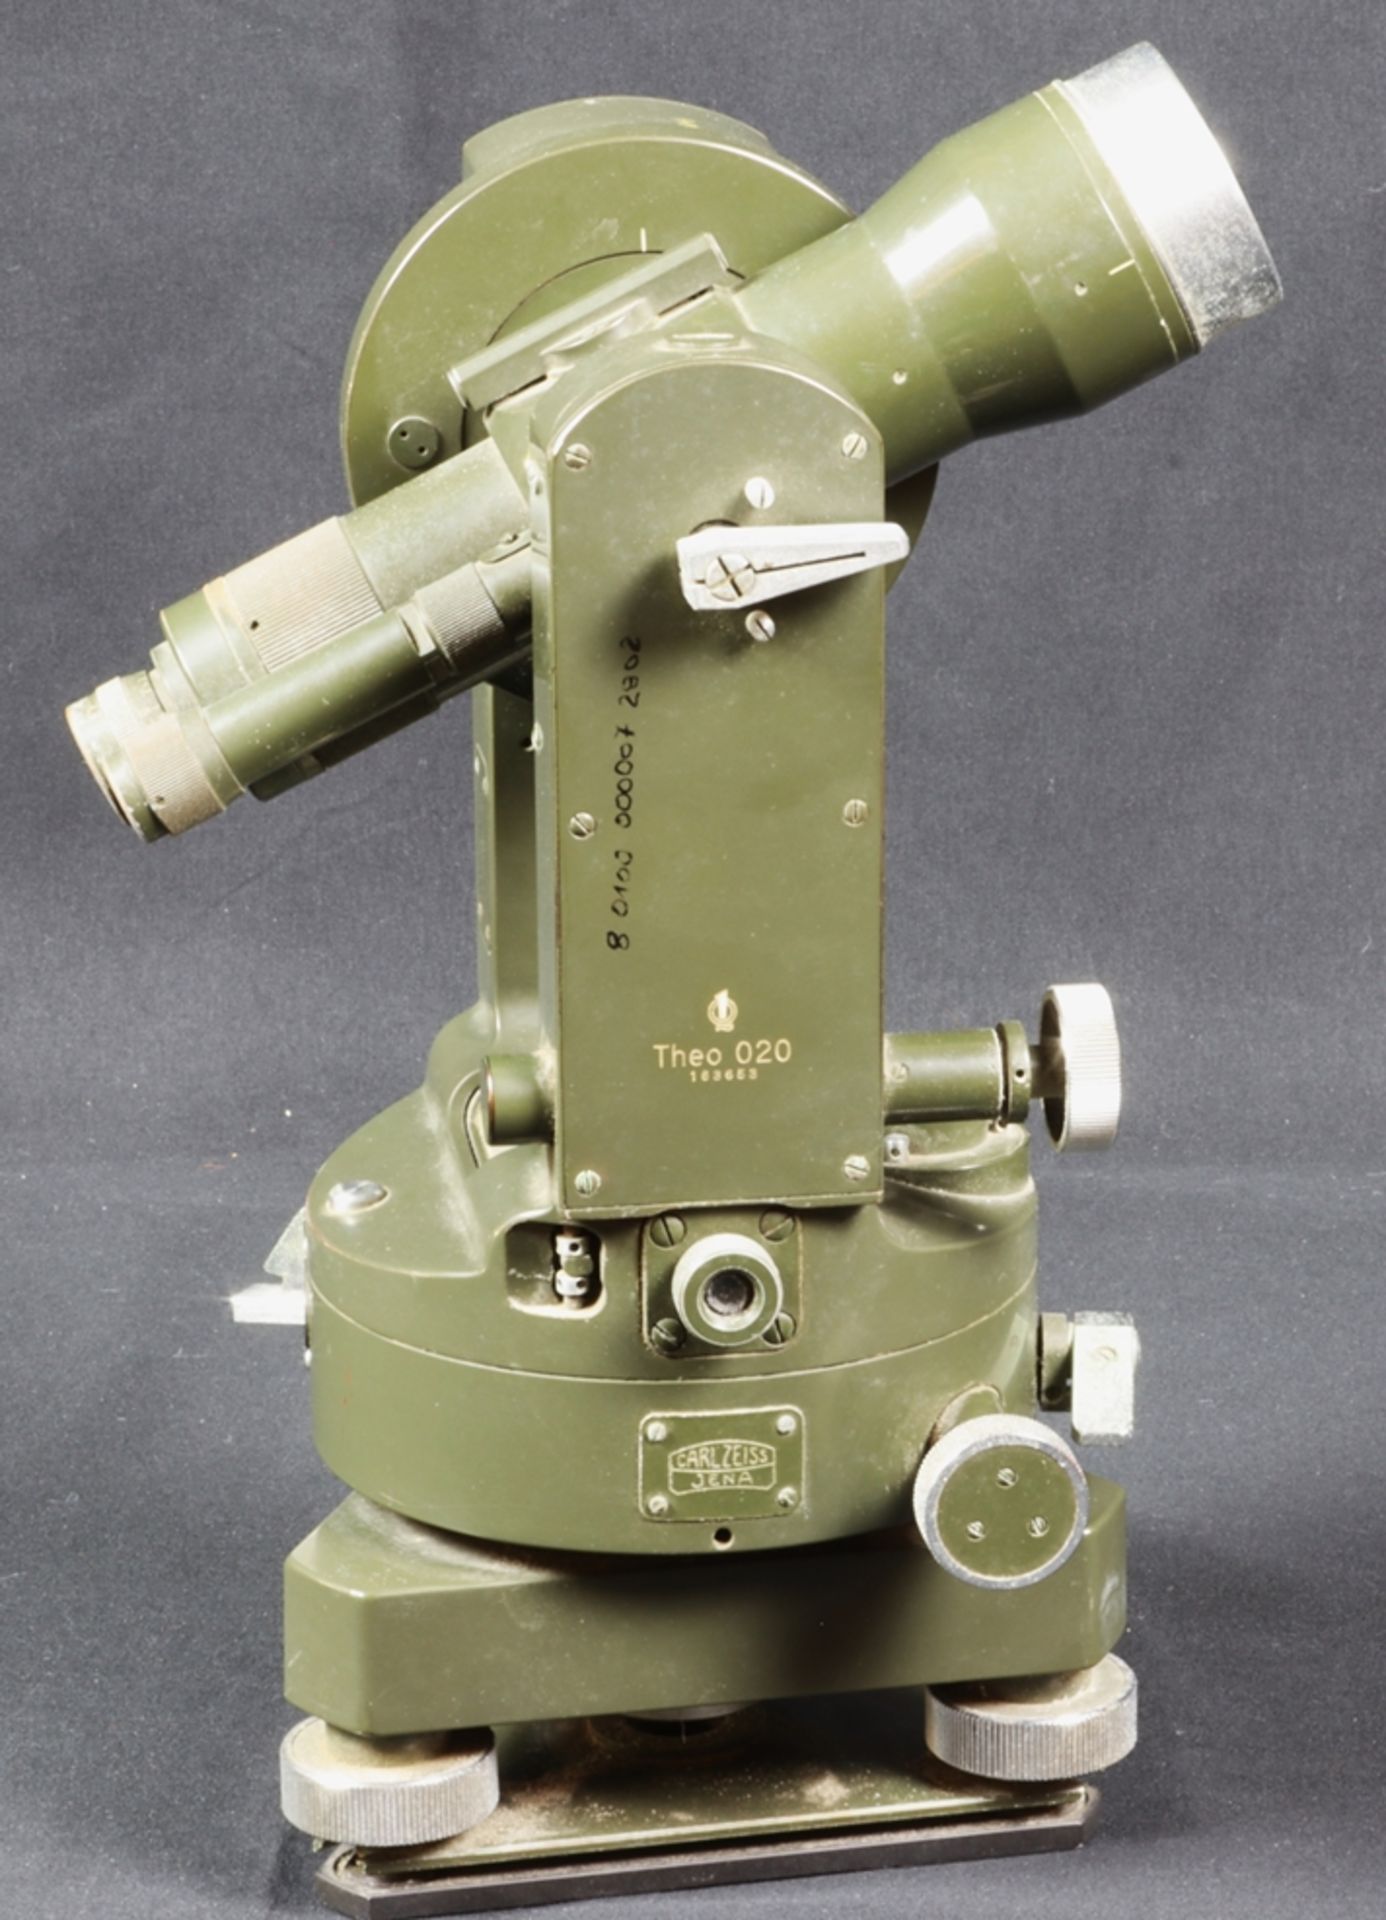 Theodolite Military measuring device, Carl-Zeiss-Jena 50s of the 20th century, GDR - Image 2 of 3